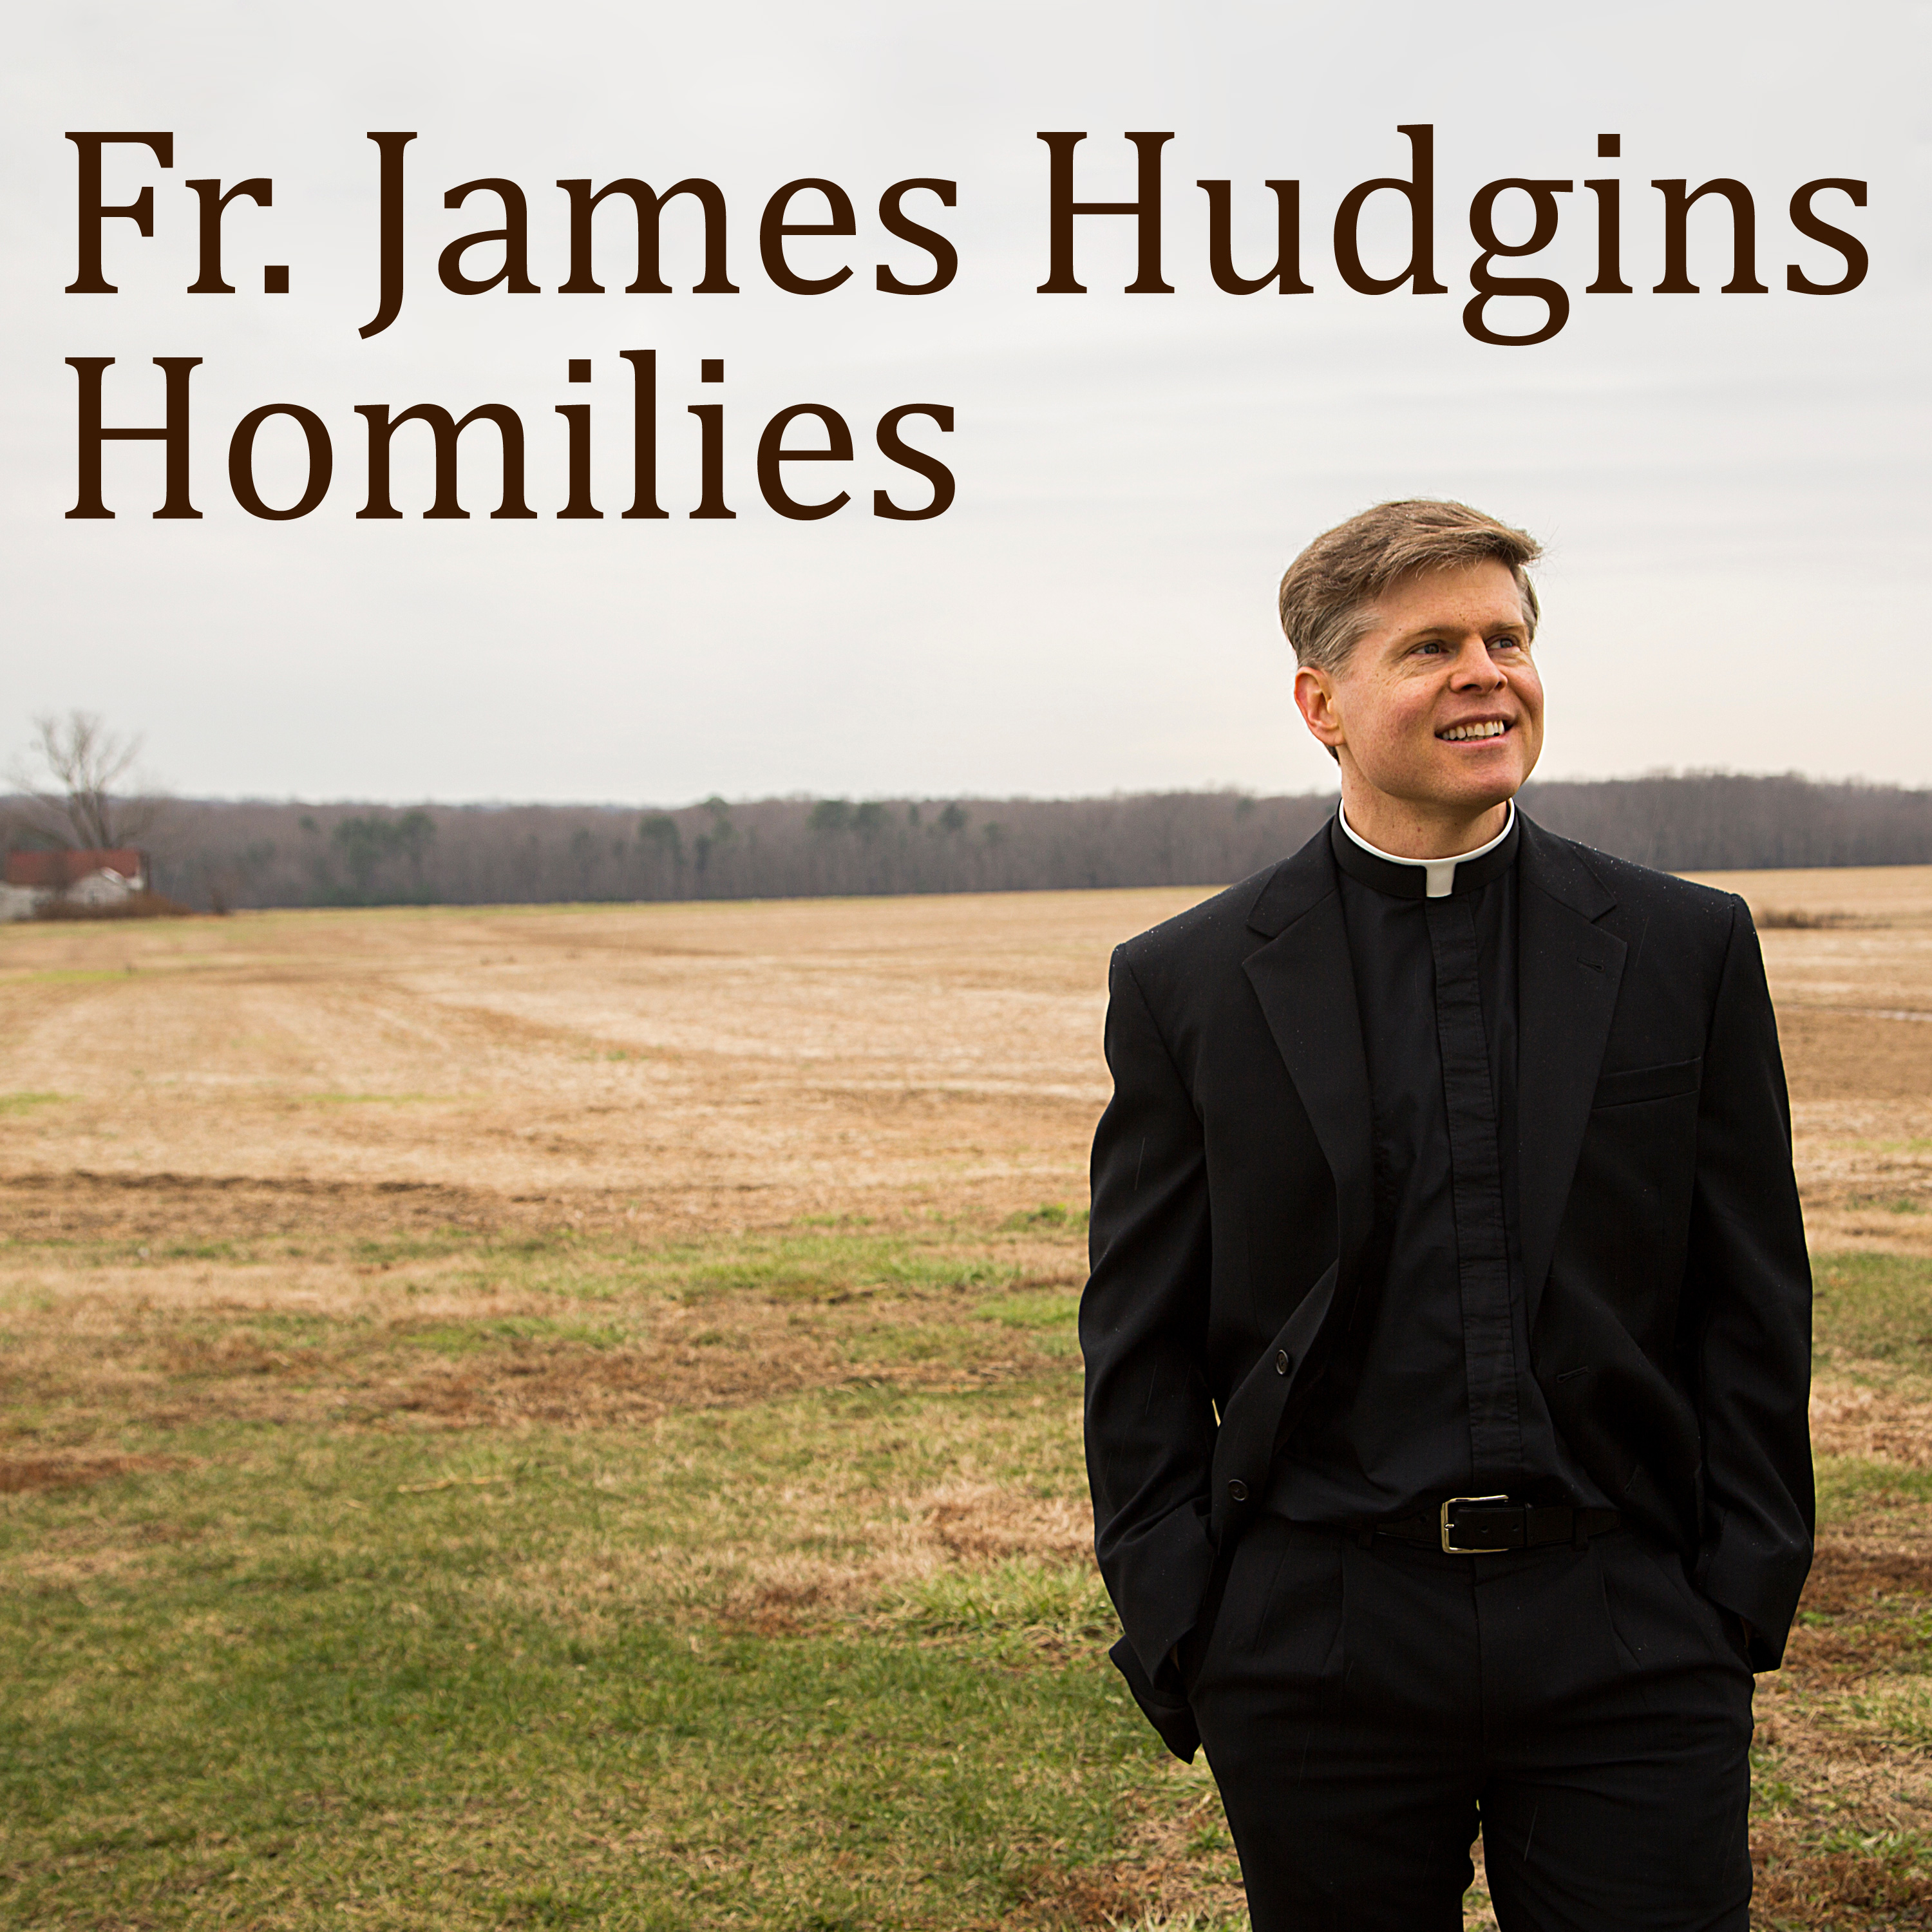 Father Hudgins' Homilies